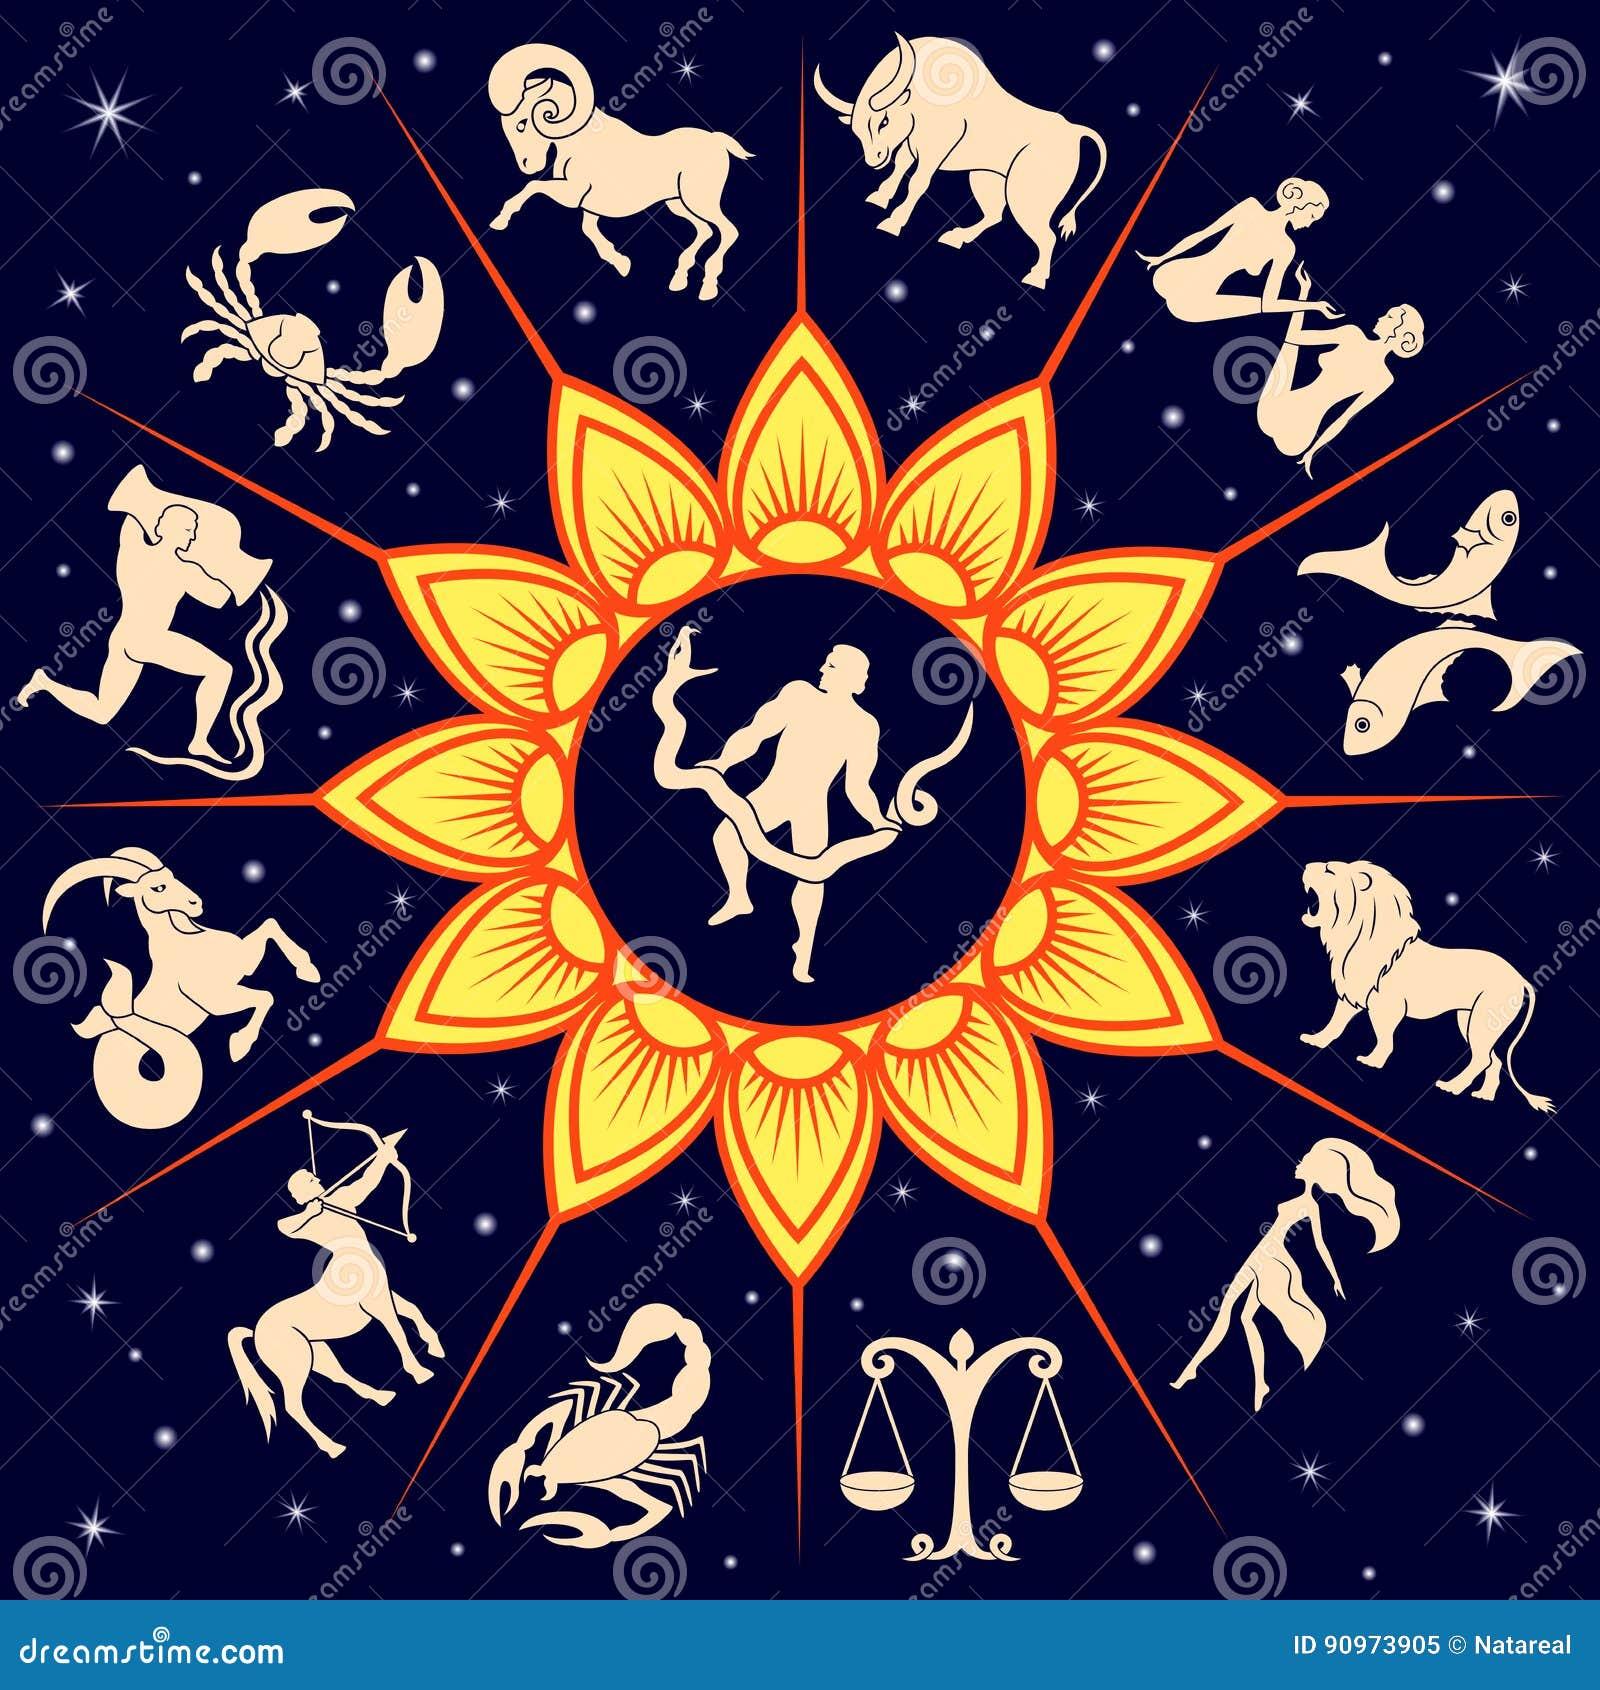 twelve zodiac signs around the sun and ophiuchus